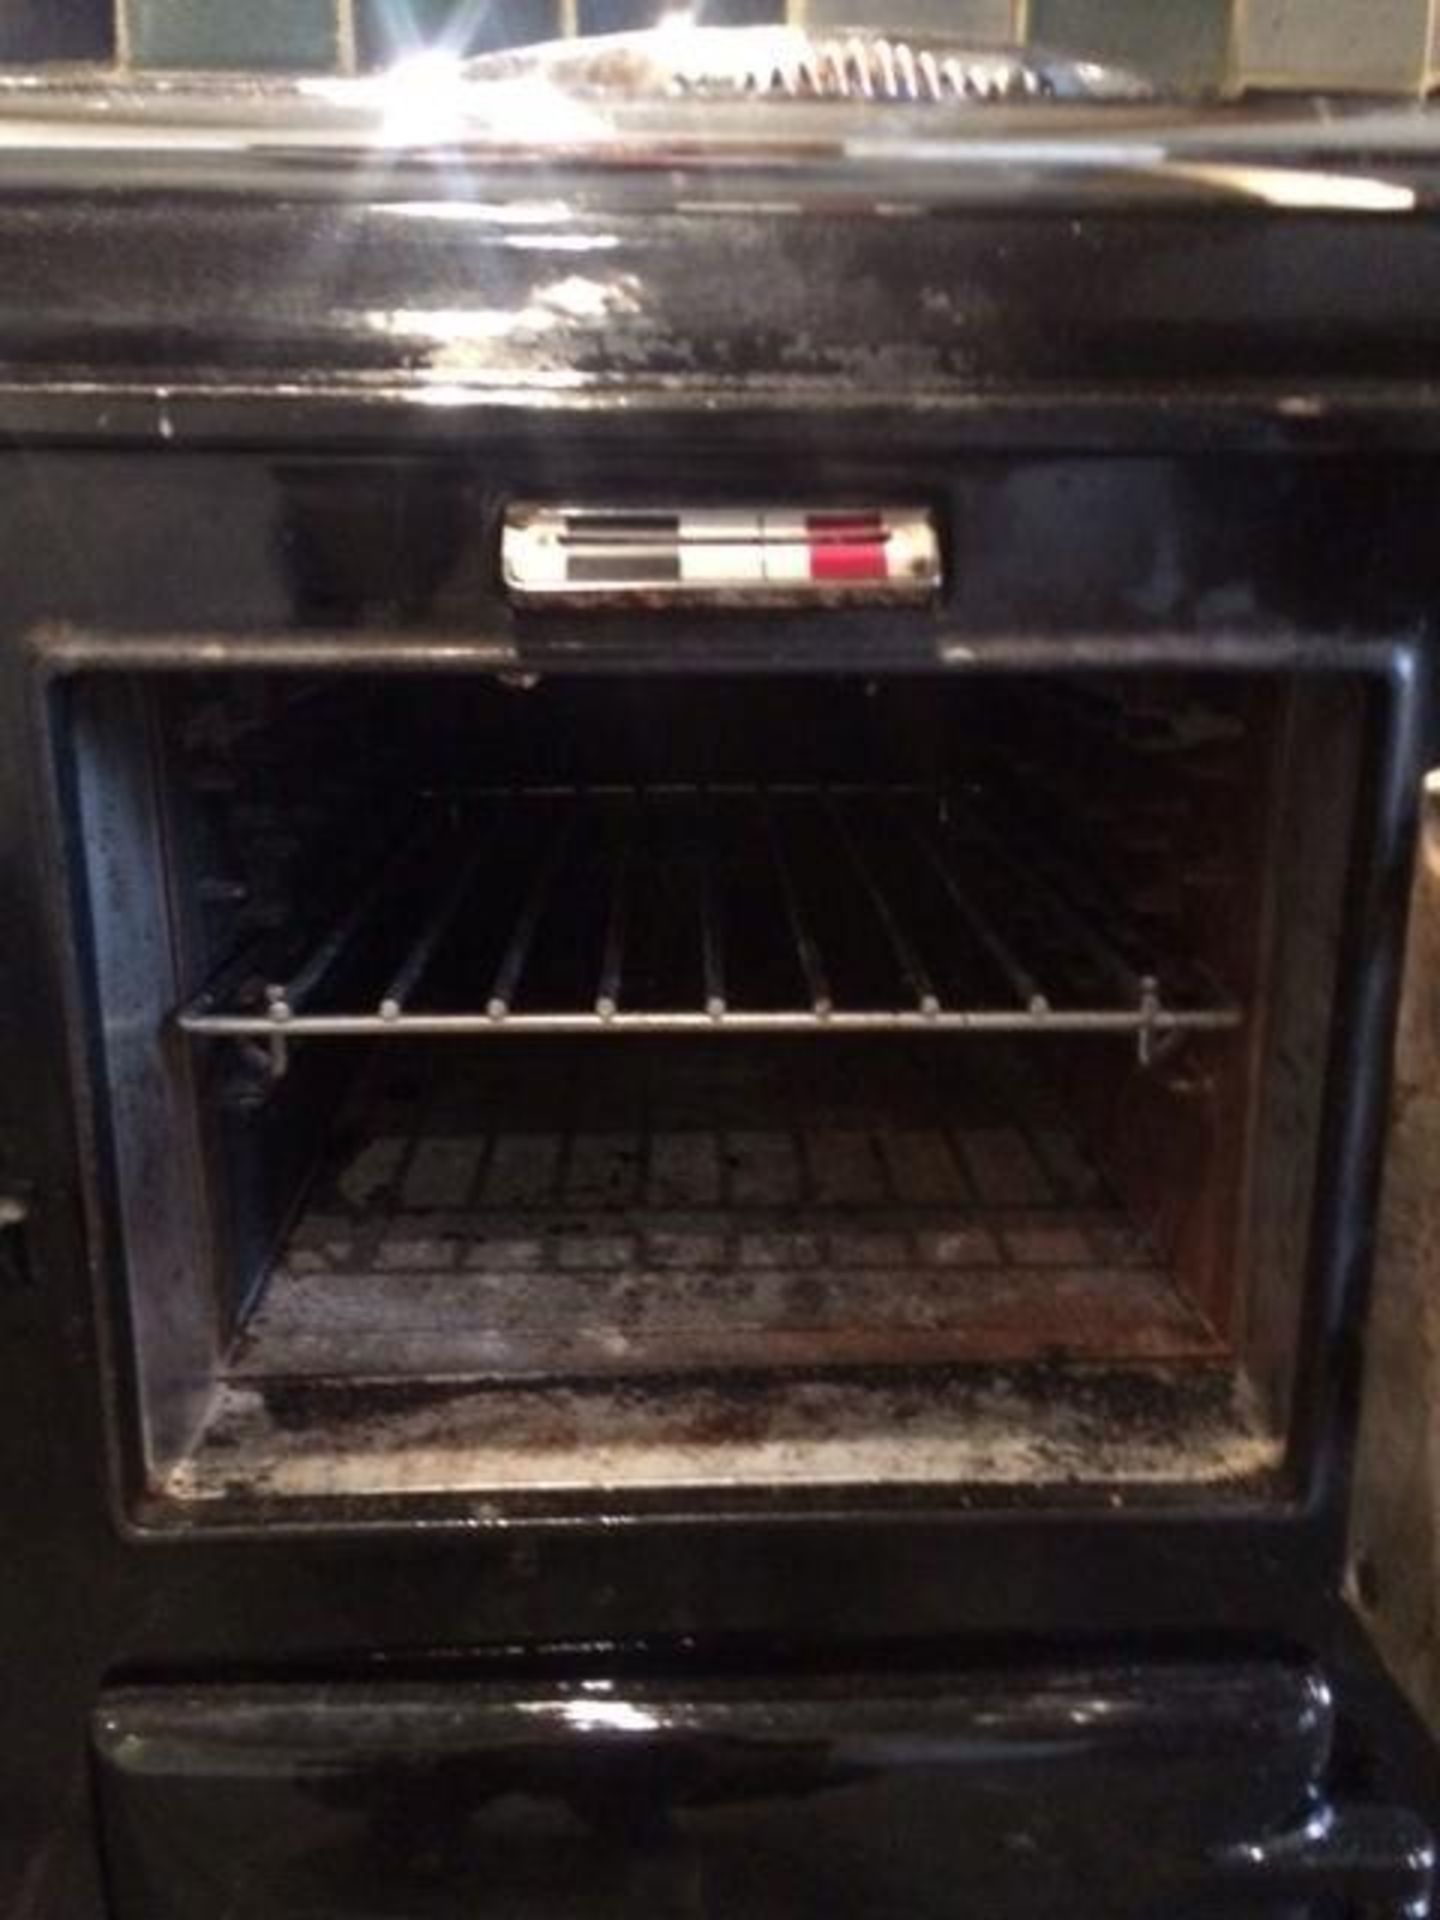 1 x Aga 2-Oven Gas Range Cooker - Cast Iron With Black Enamel Finish - Preowned In Good Working - Image 2 of 9